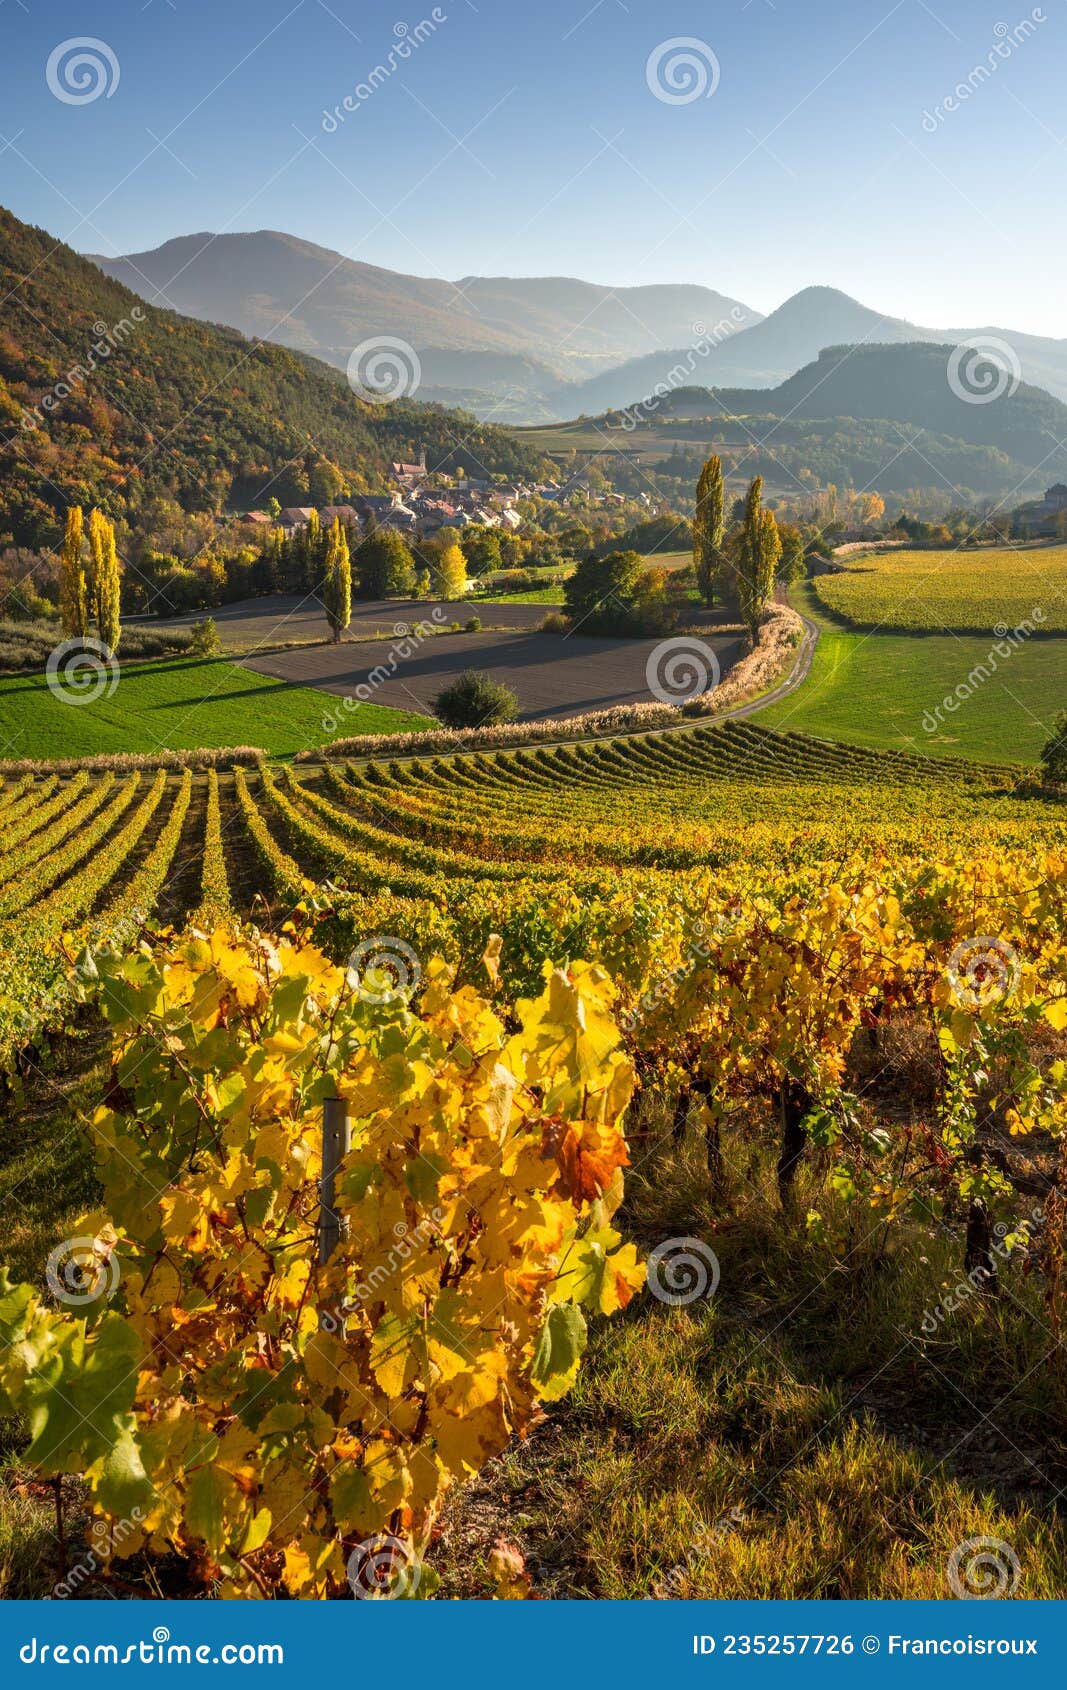 vineyards  in the hautes-alpes with the village of valserres in autumn. alps, france